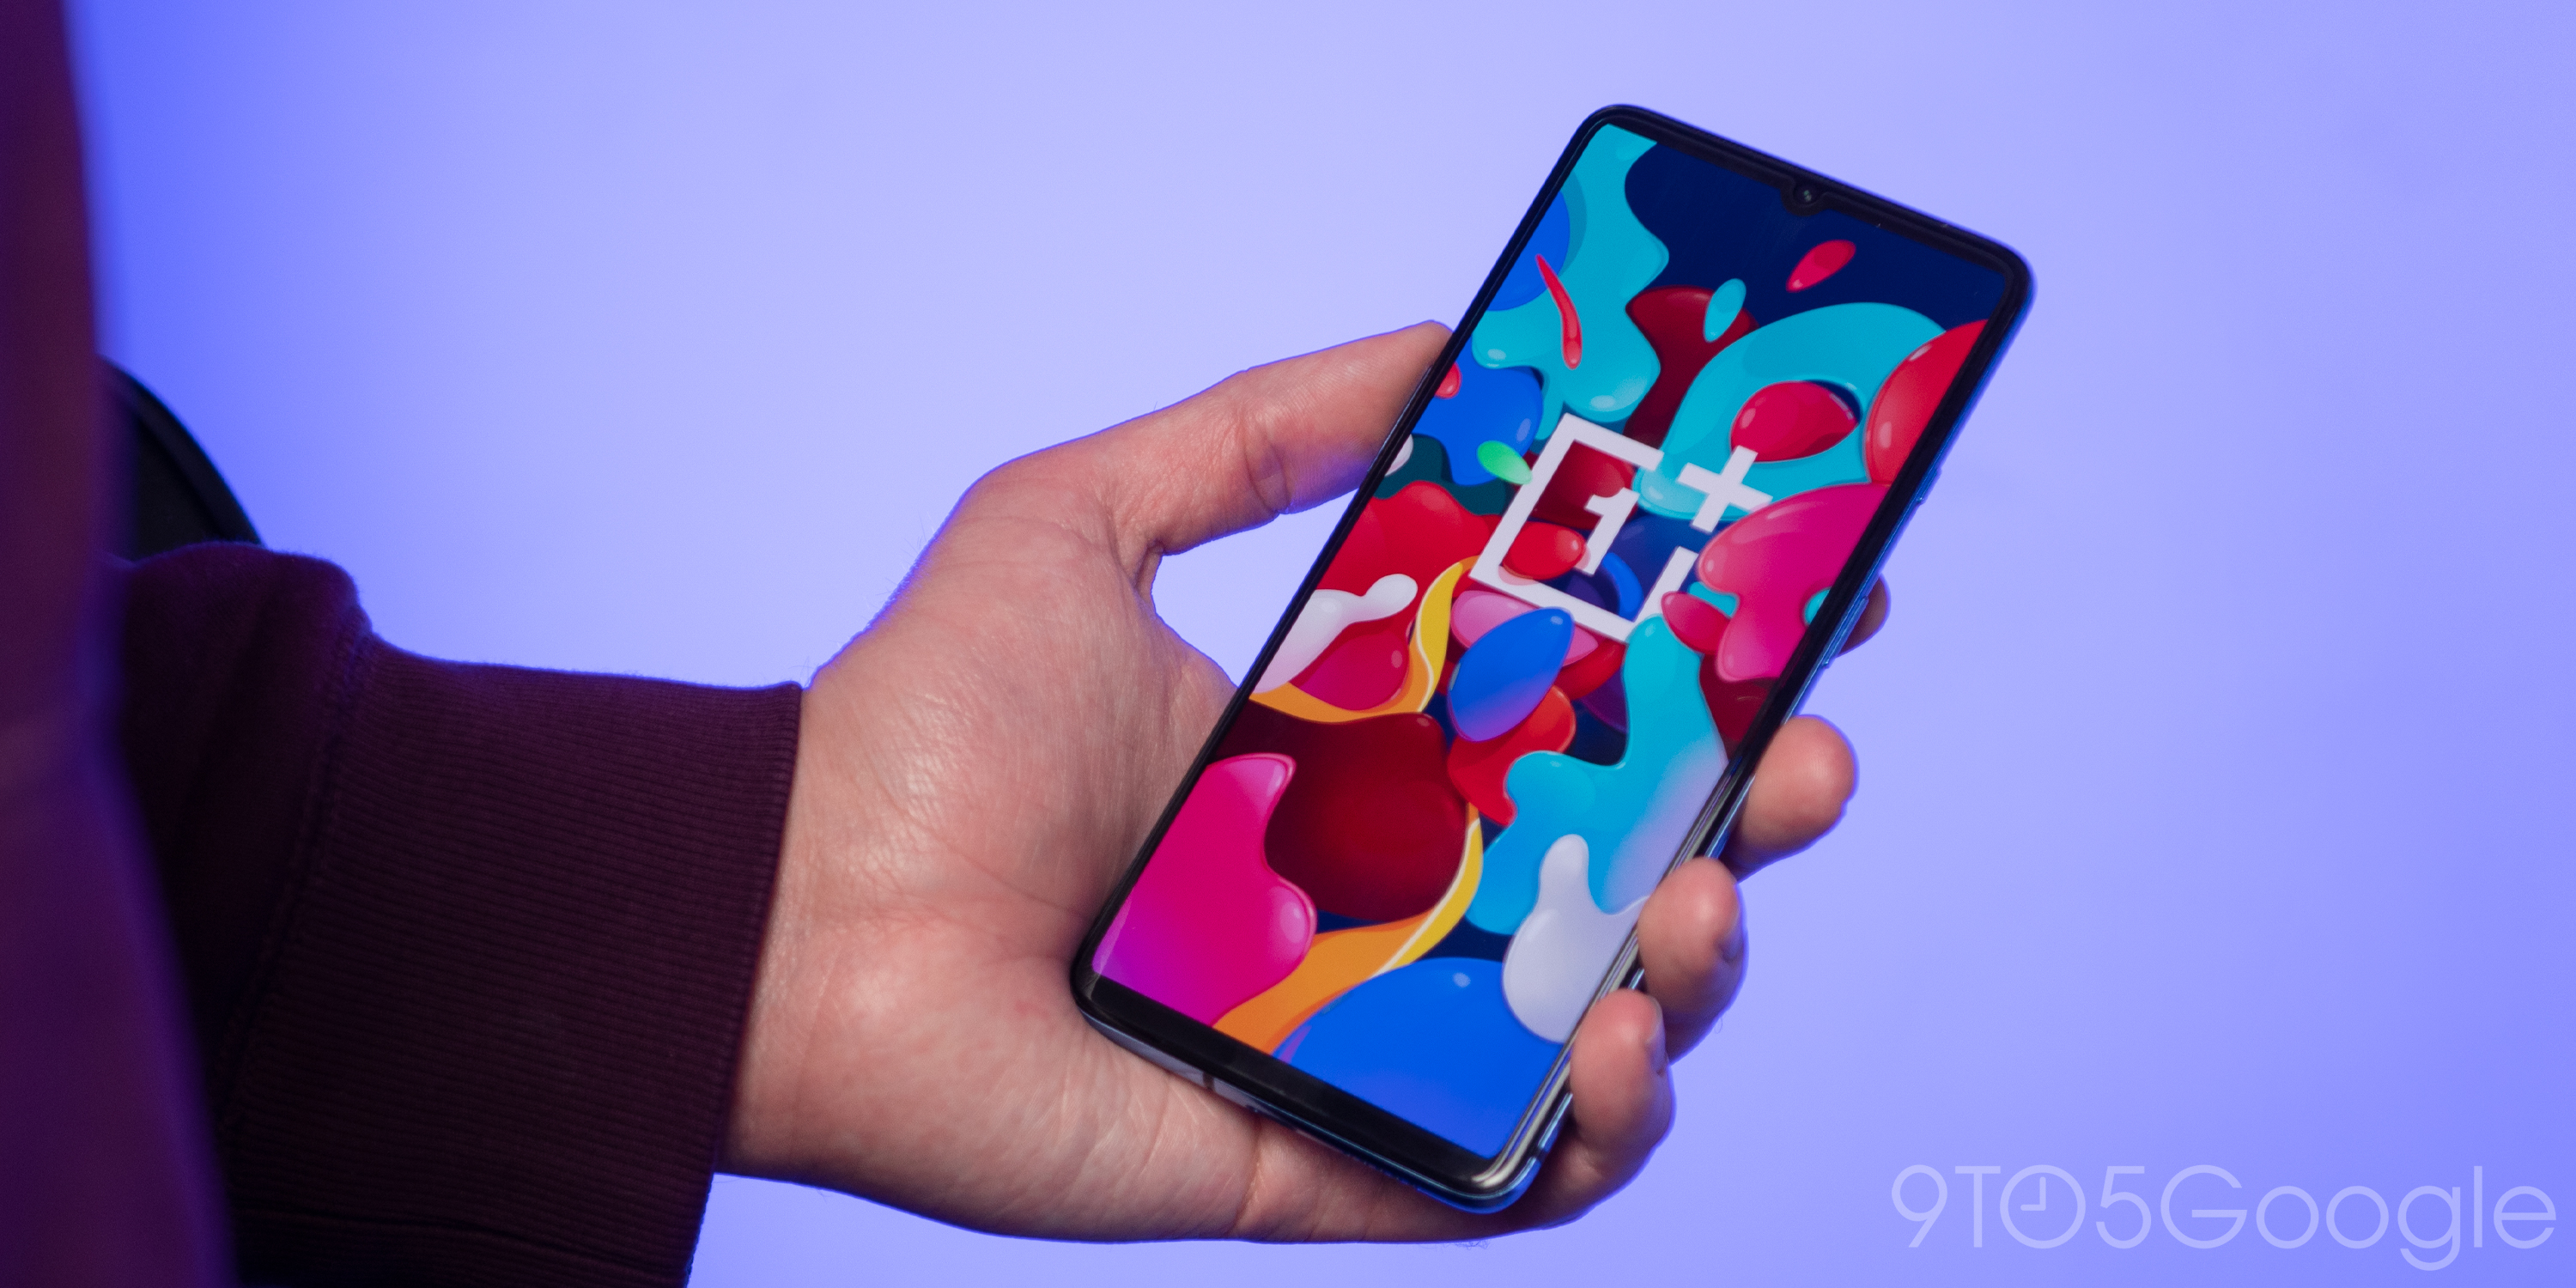 Download new OnePlus wallpapers w/ colorful new logo - 9to5Google